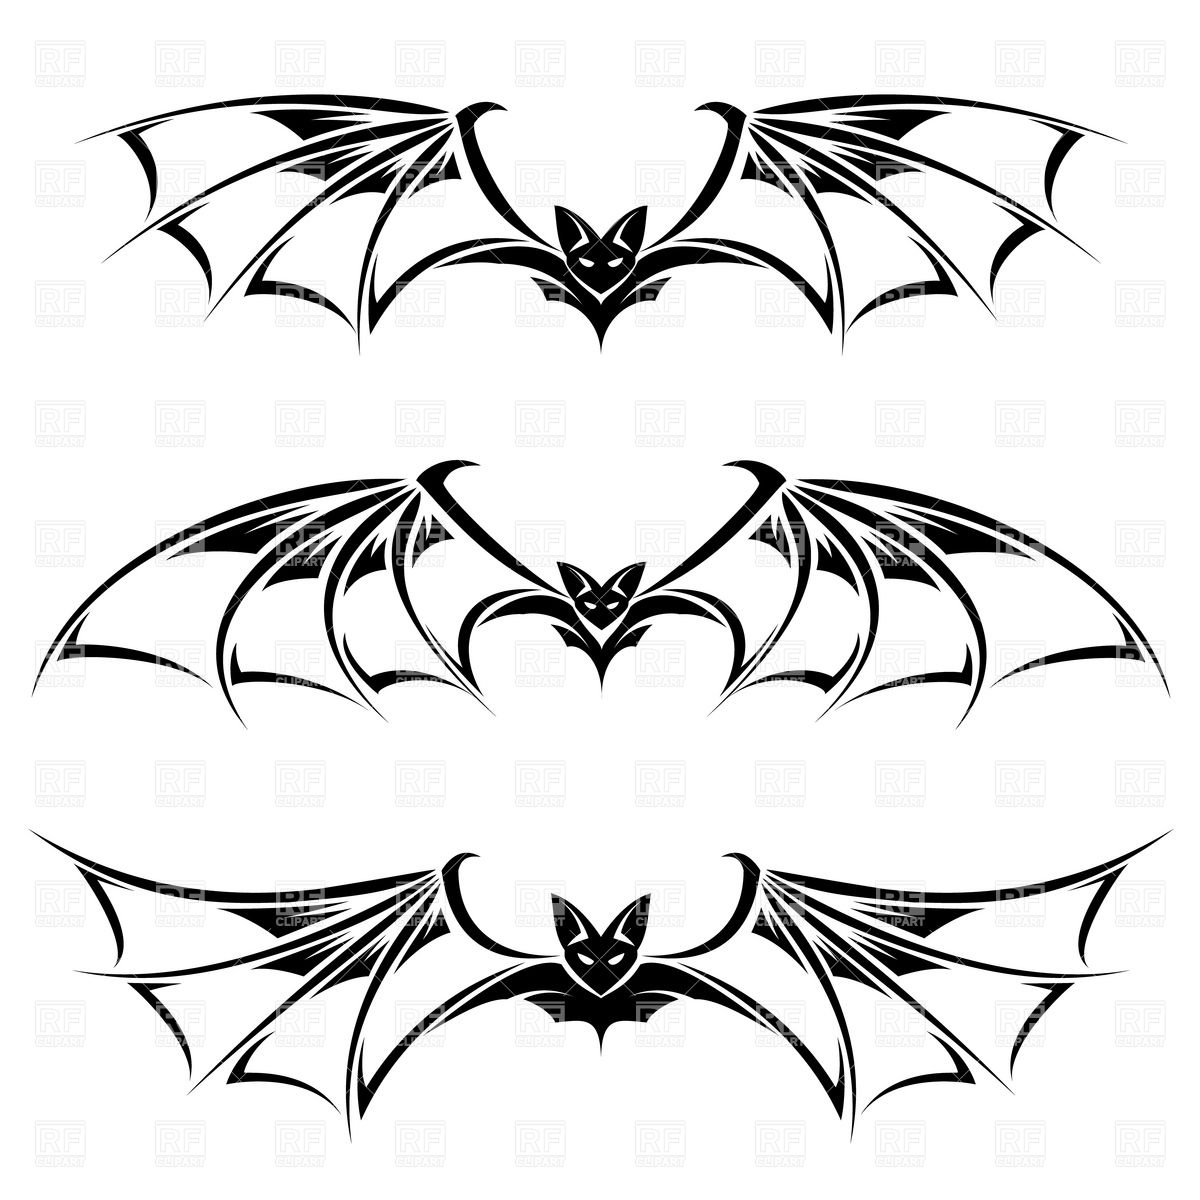 Bat 7519 Silhouettes Outlines Download Royalty Free Vector Clipart